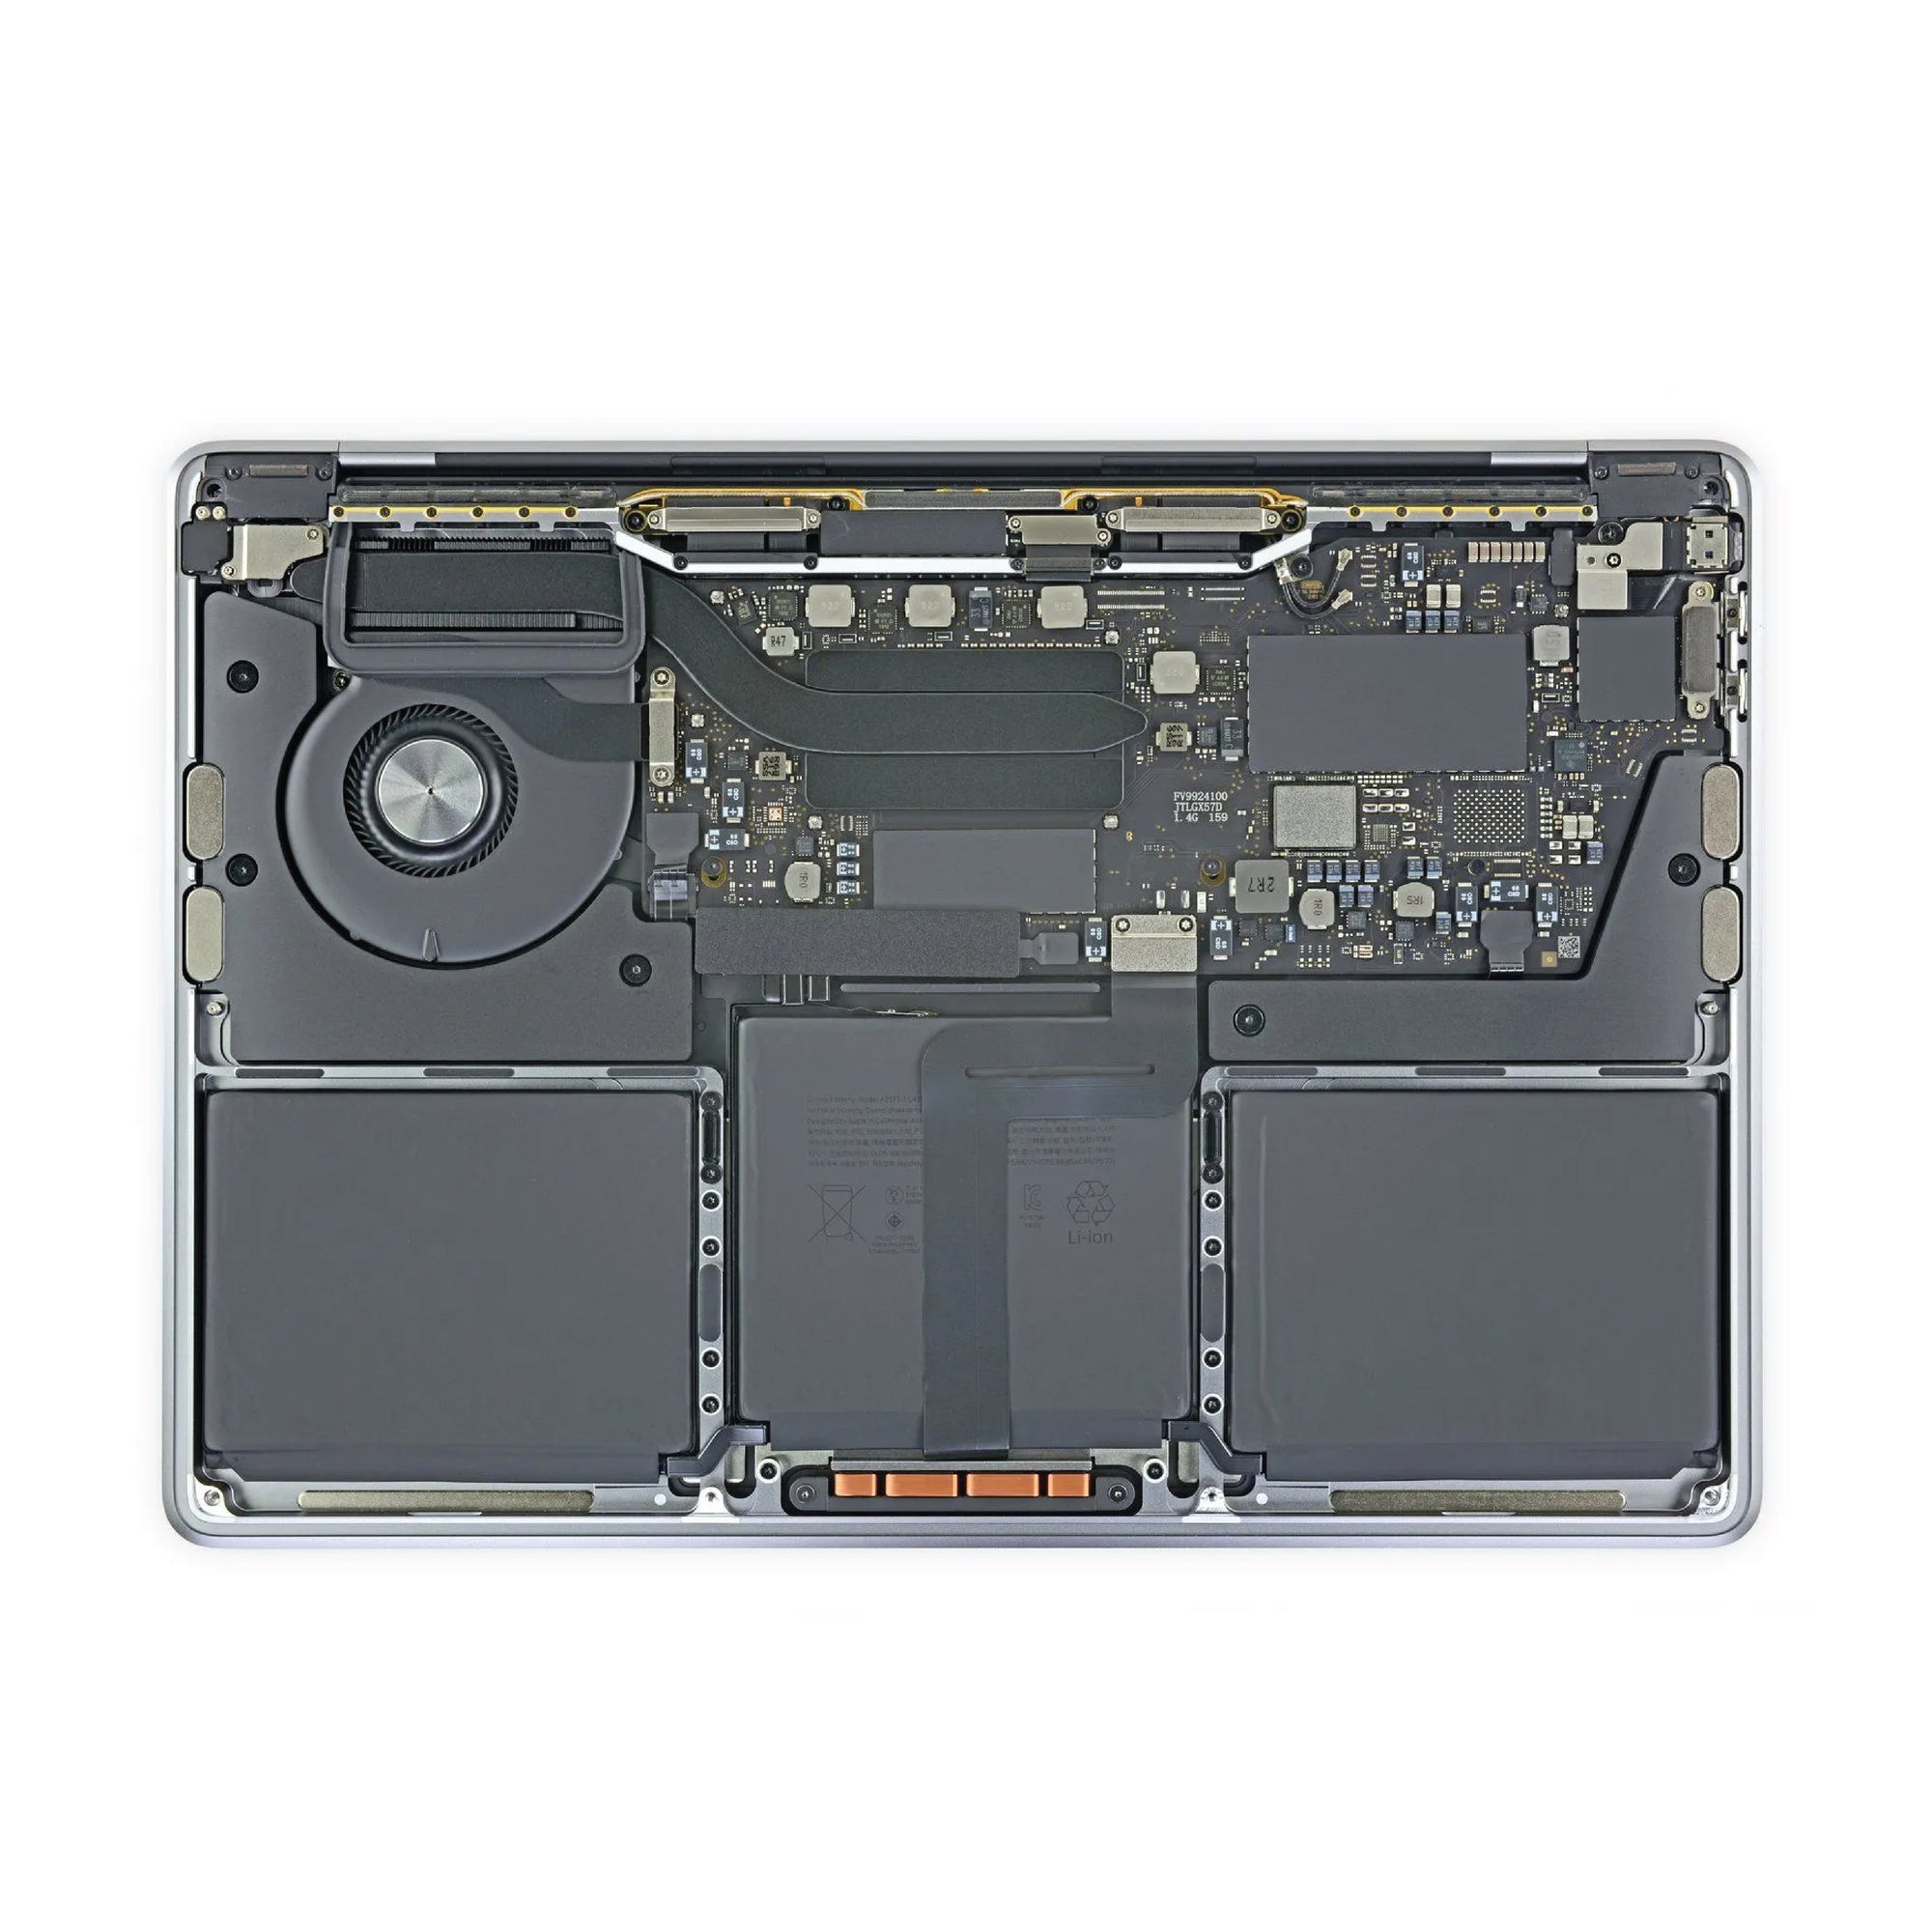 MacBook Pro Tune Up Thermal Paste Fan Clean Port Clean